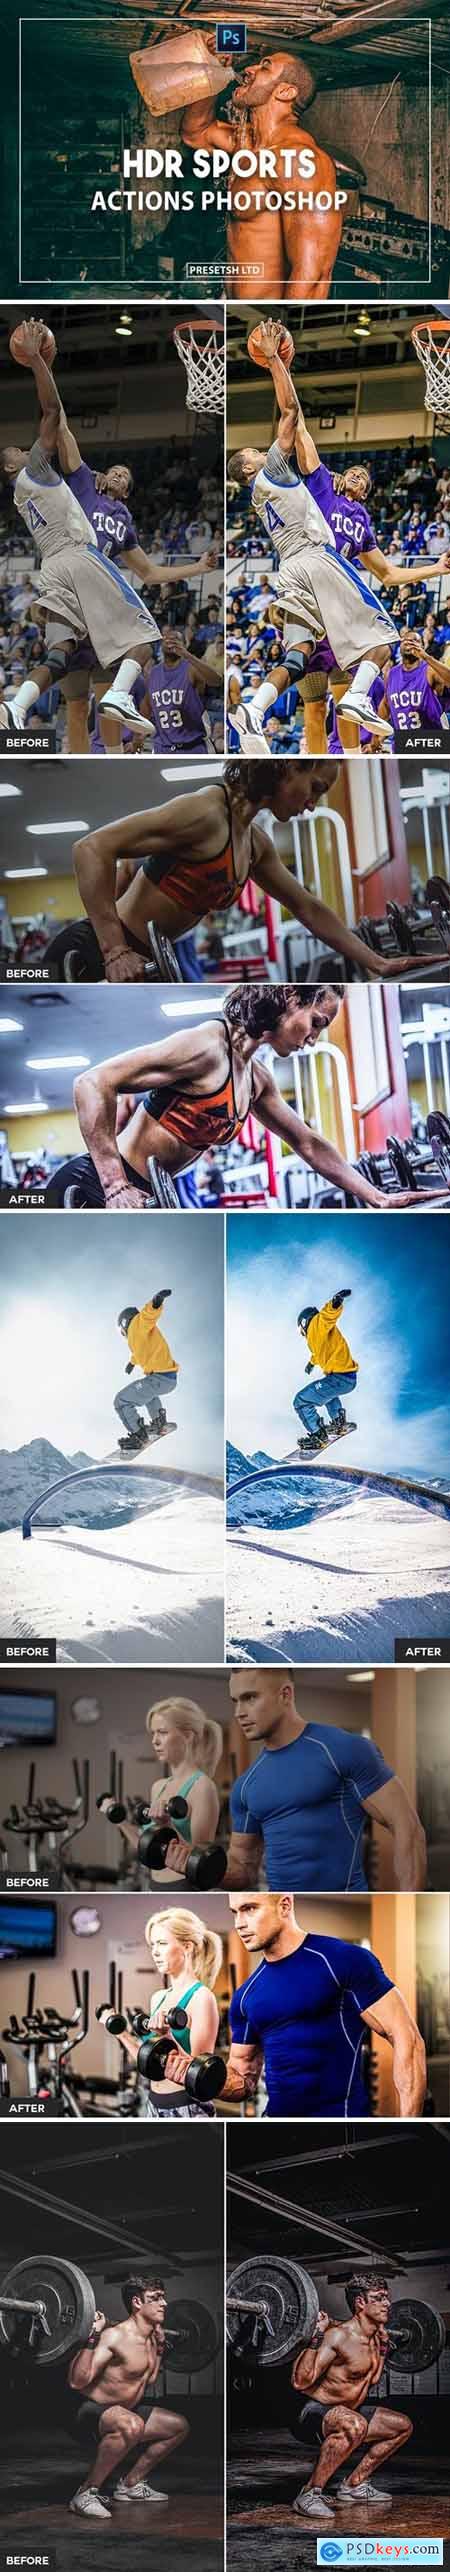 Sports Photoshop Actions